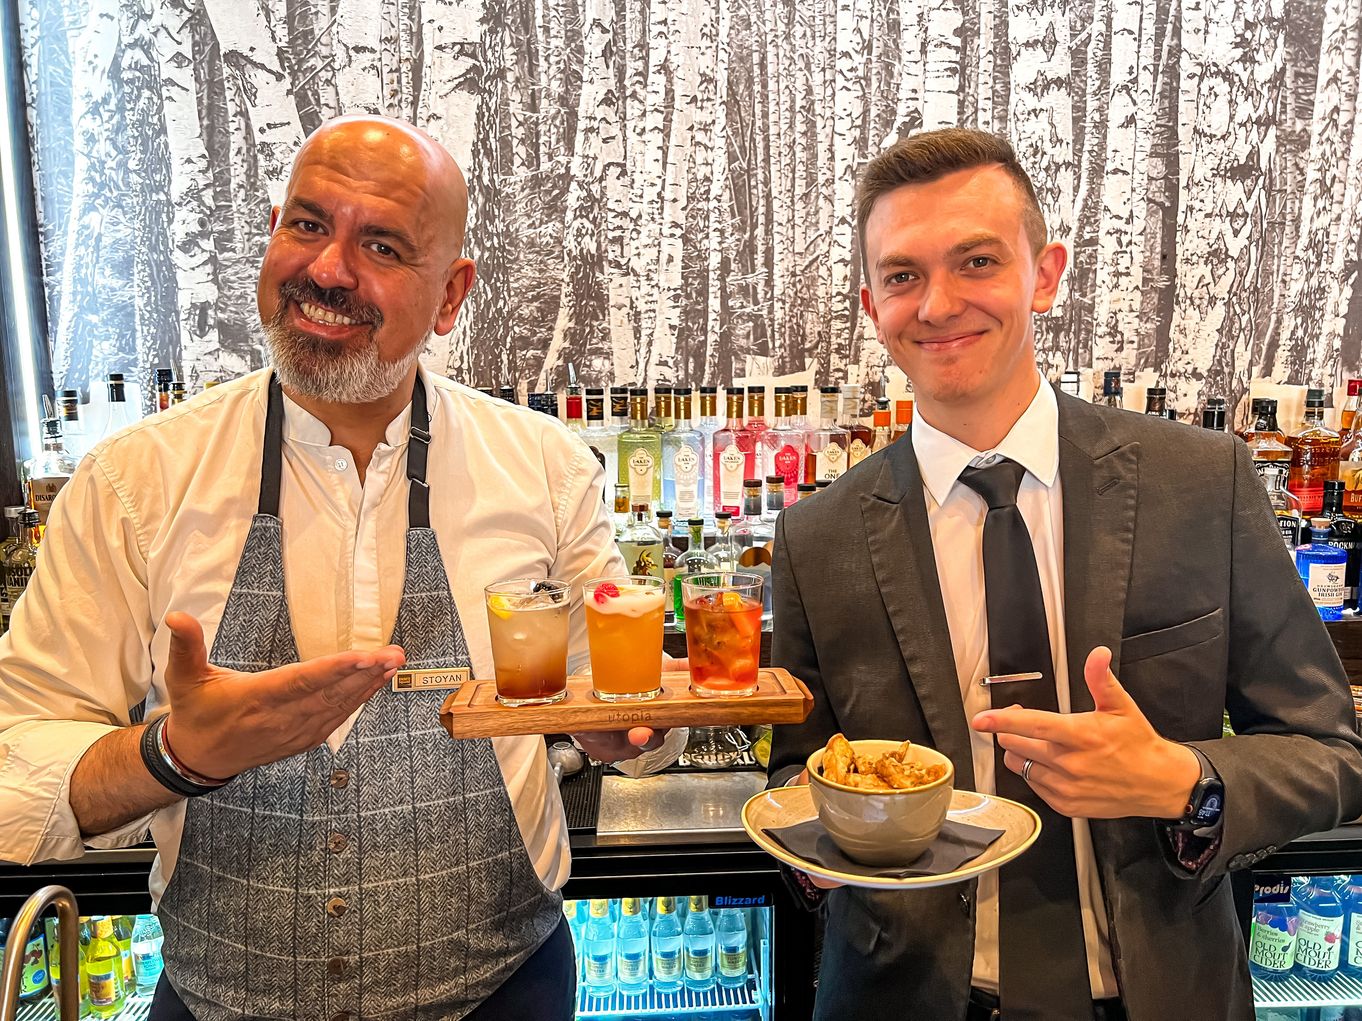 Inn on the Square's new Cocktail Flight and free nibbles